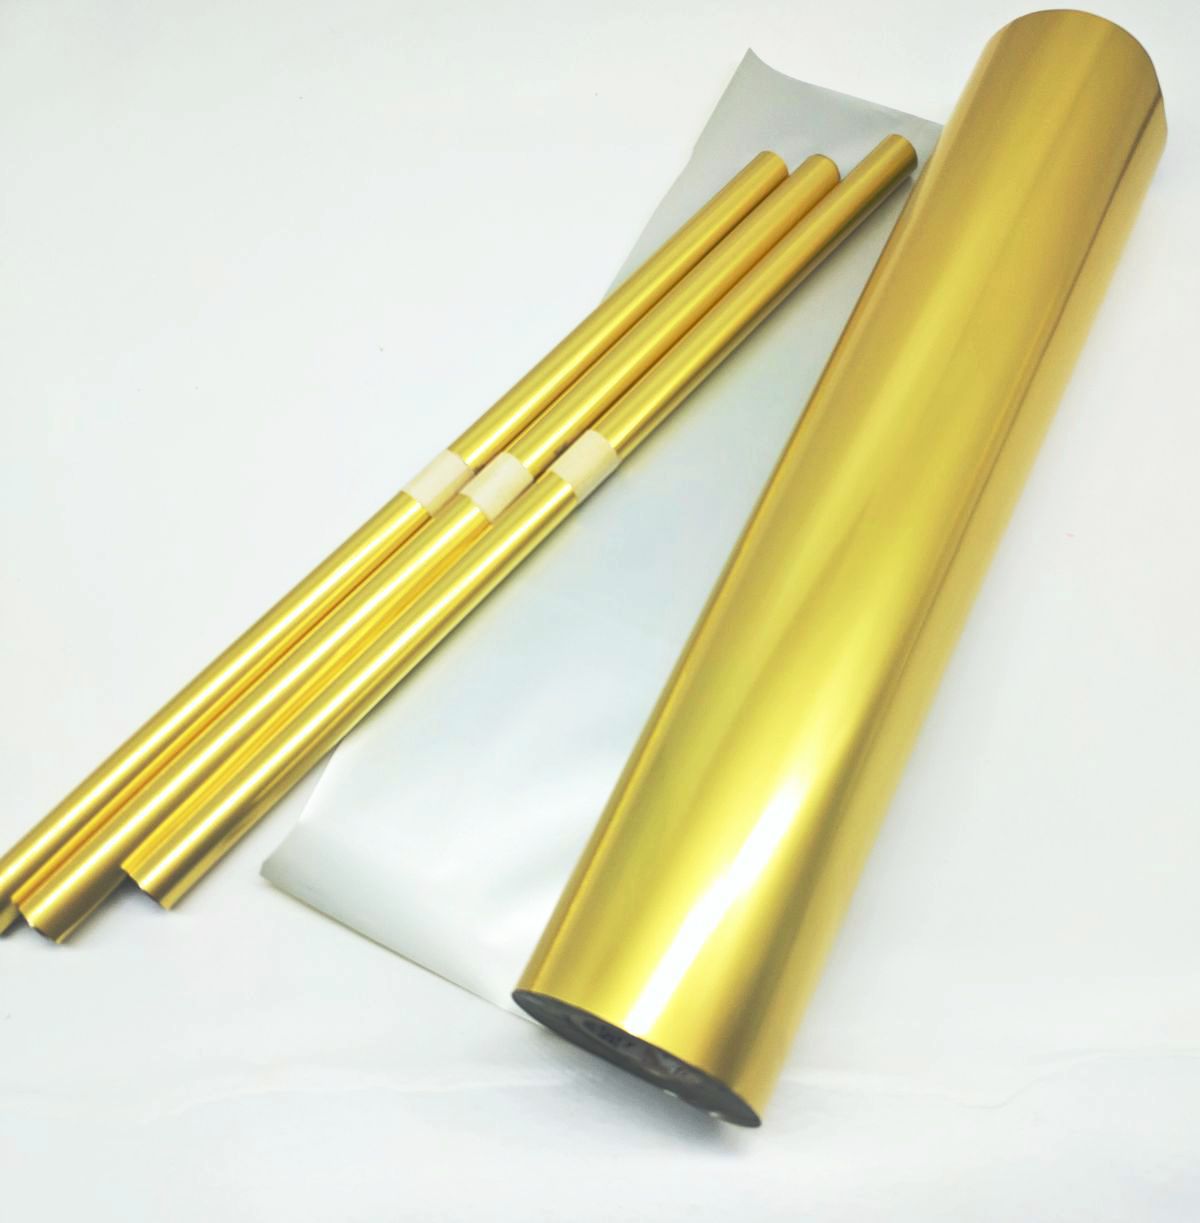 Foil Quill Hot Stamping - Ouro Fosco - 30 cm